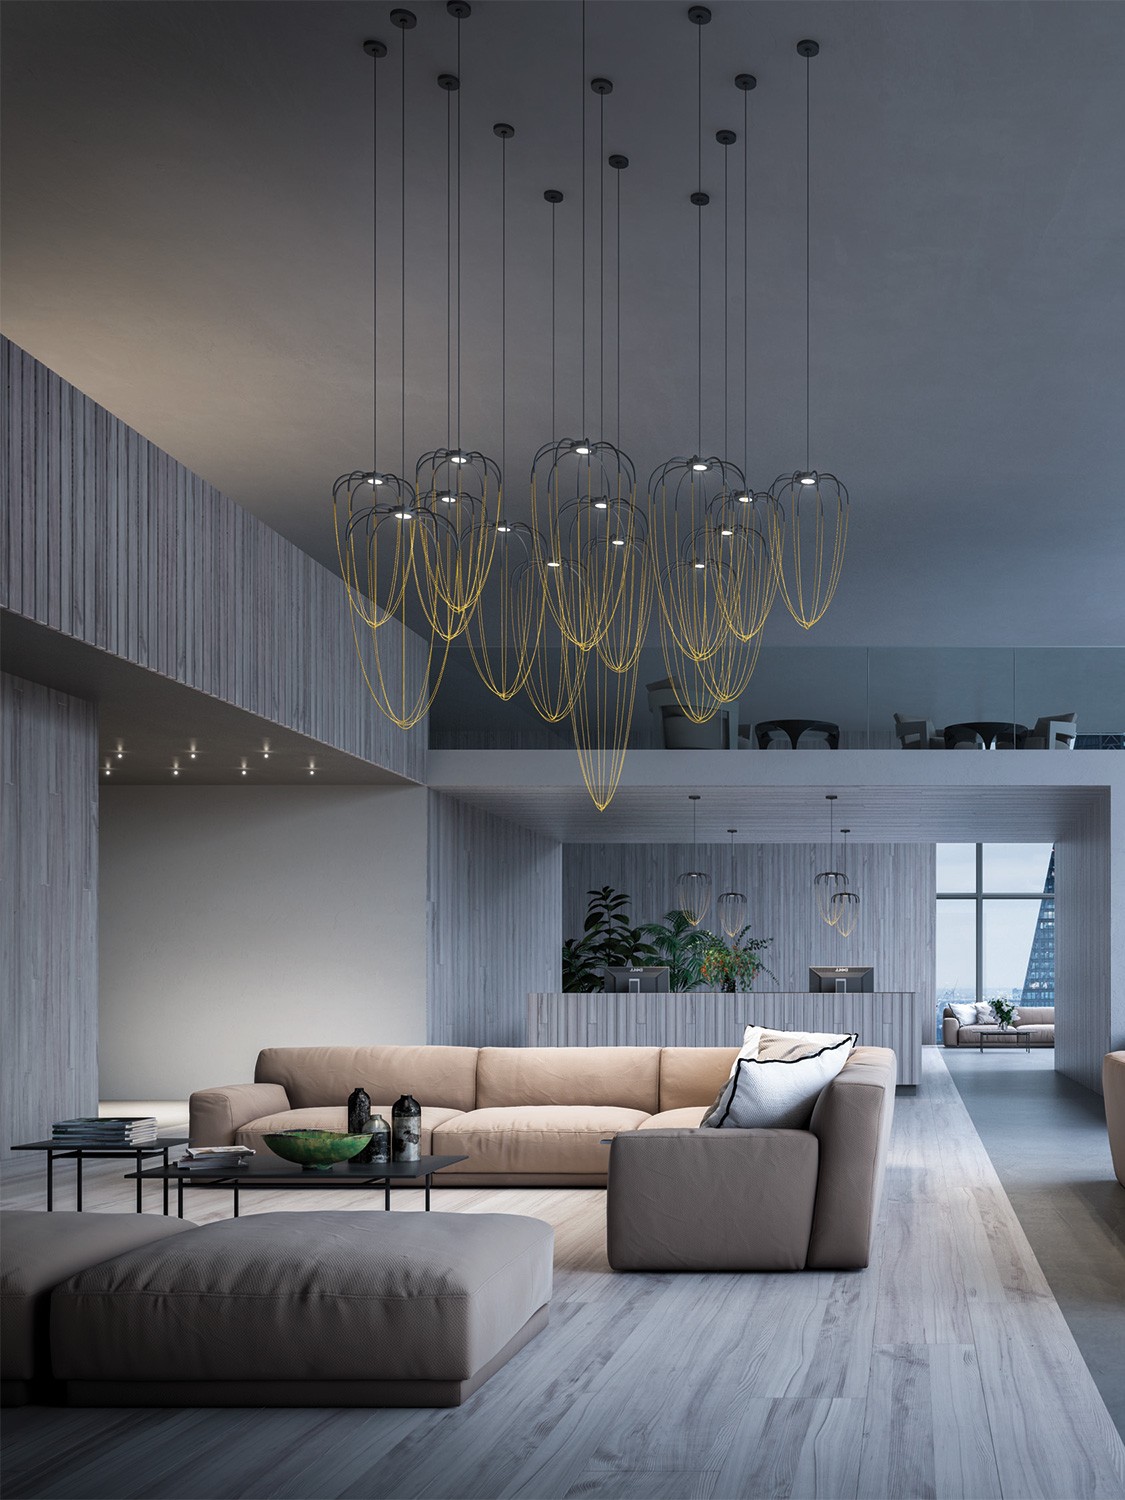 Contemporary Light Fixtures Inspired By Architectural Design